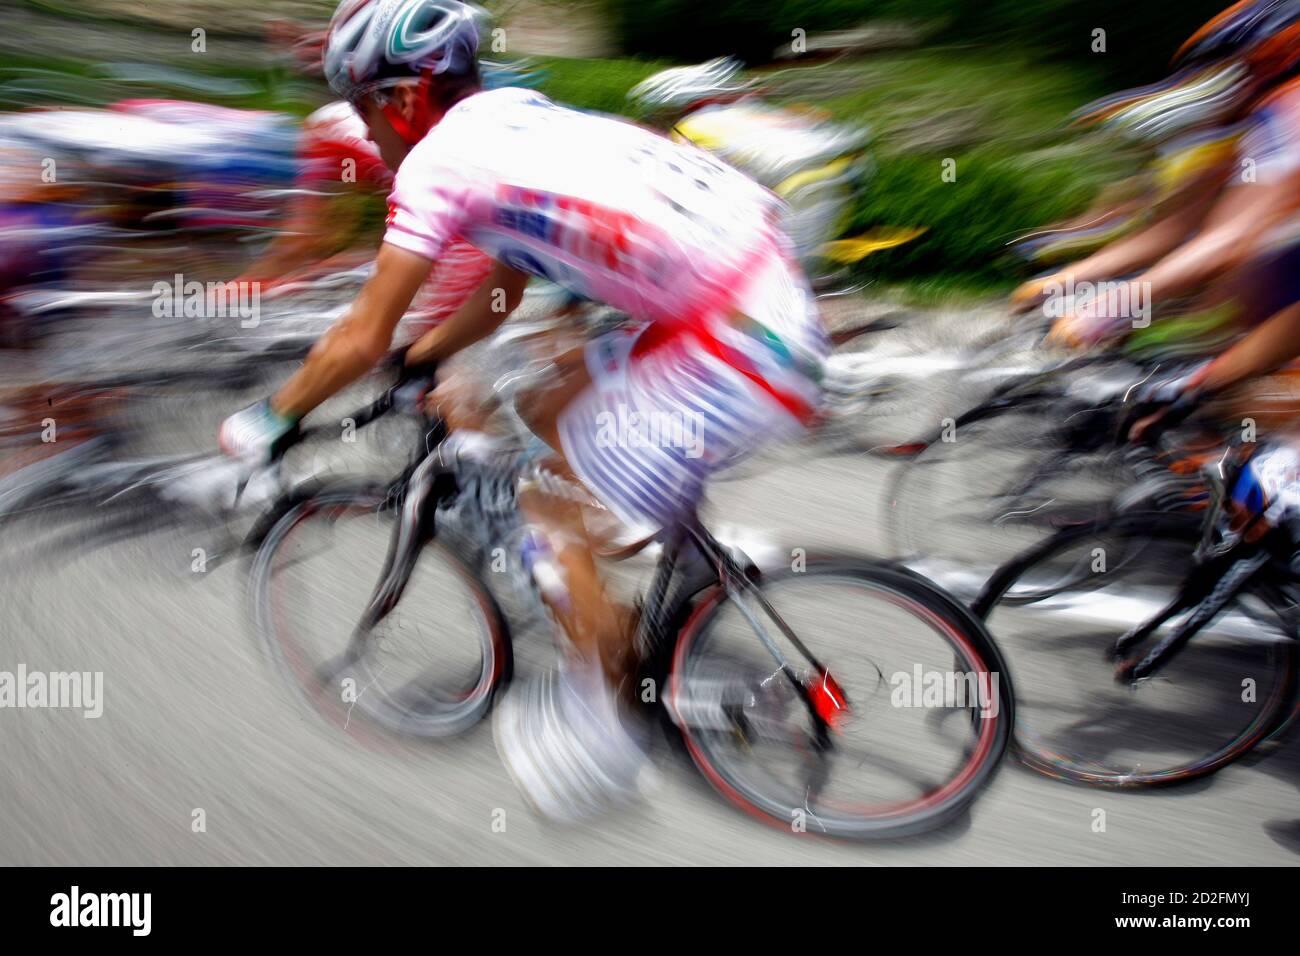 Italy's Giovanni Visconti, wearing the leader's pink jersey, cycles during the eighth stage of the Giro d'Italia cycling race 209-km from Rivisondoli to Tivoli May 17, 2008.  REUTERS/Giampiero Sposito (ITALY) Stock Photo